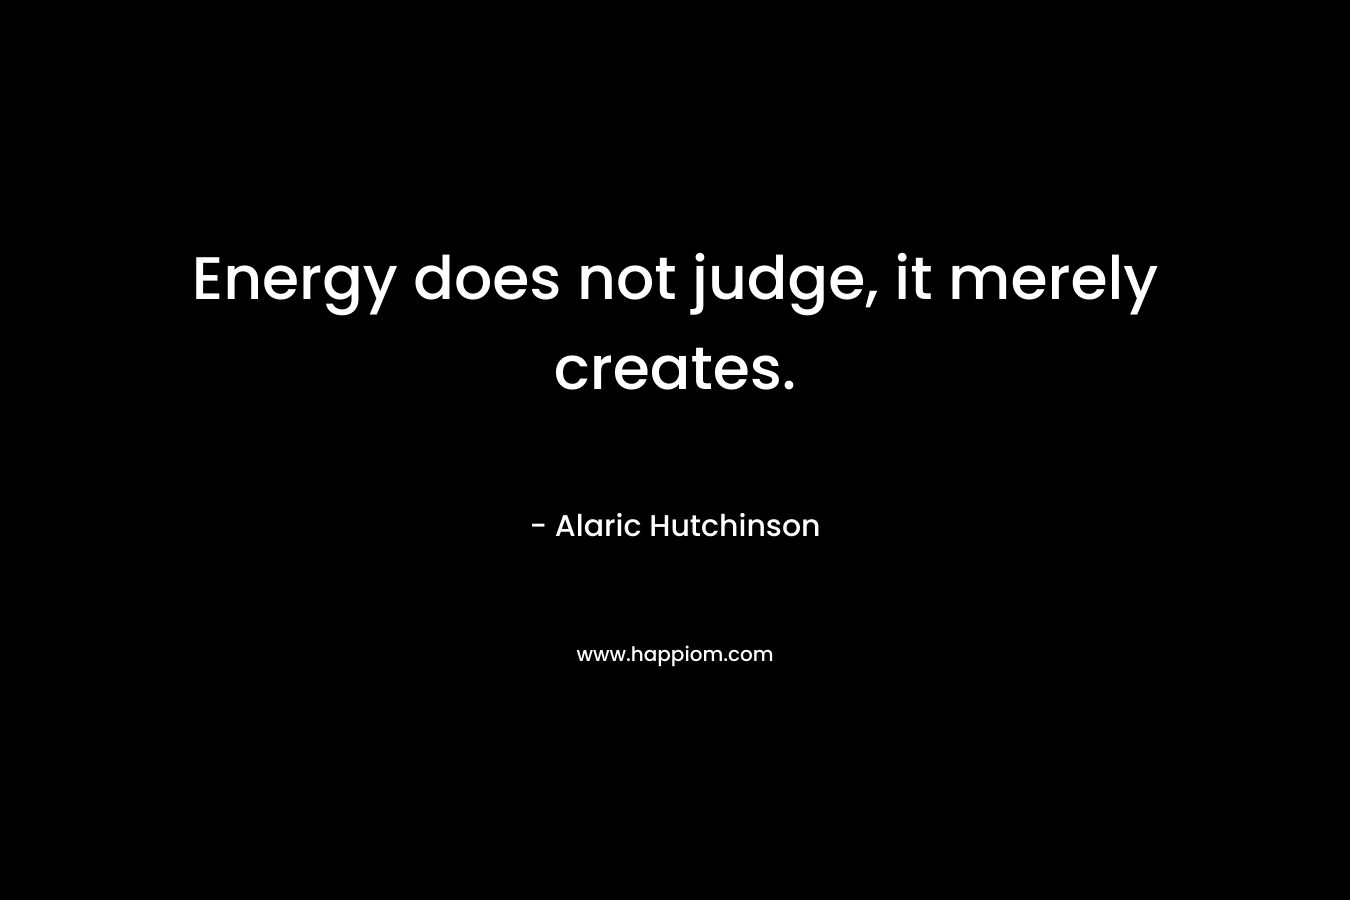 Energy does not judge, it merely creates.